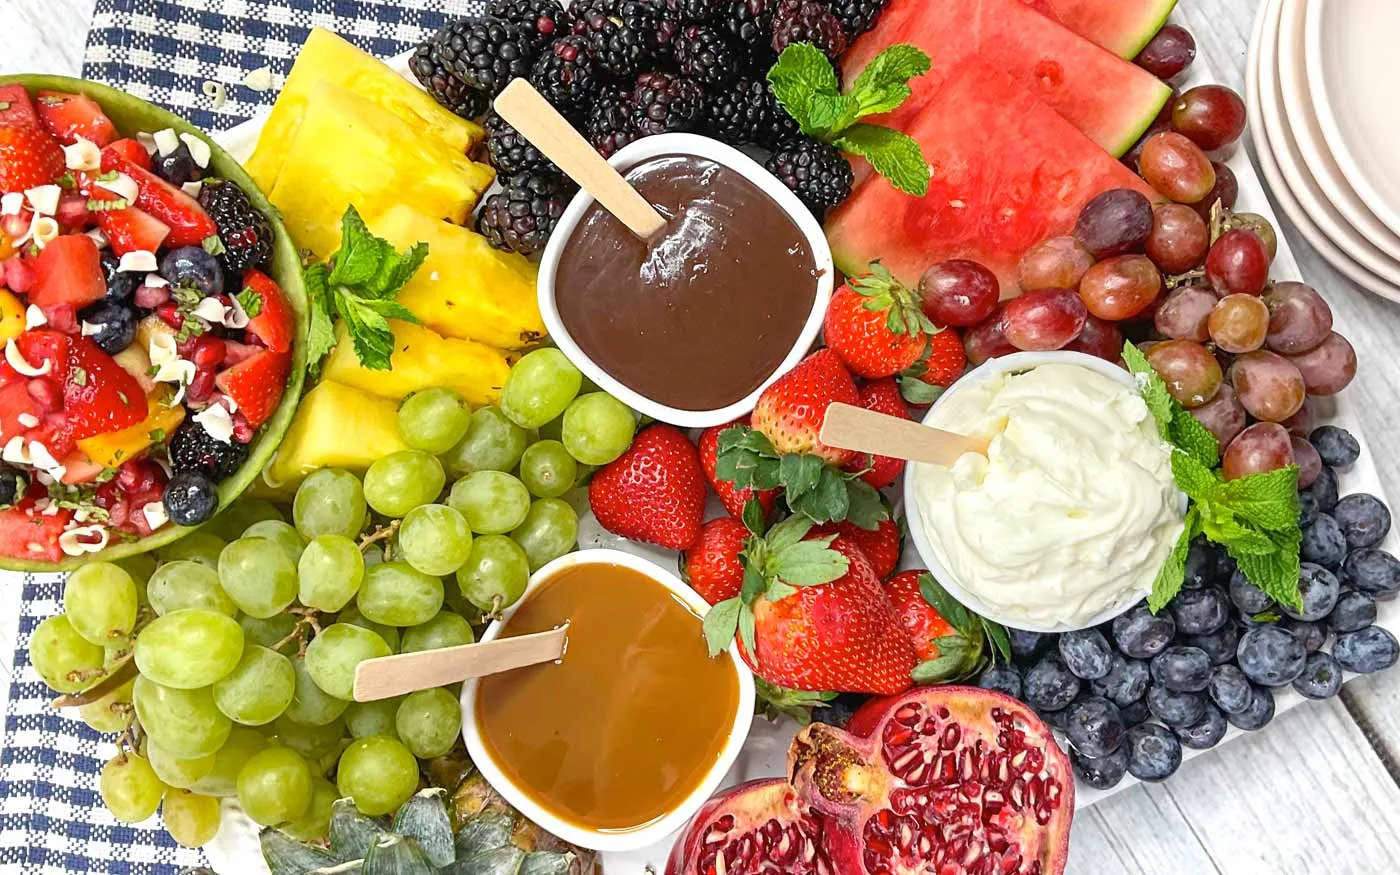 Fruit charcuterie board with 3 fruit dips, a honey glazed fruit salad and variety of fresh fruits.